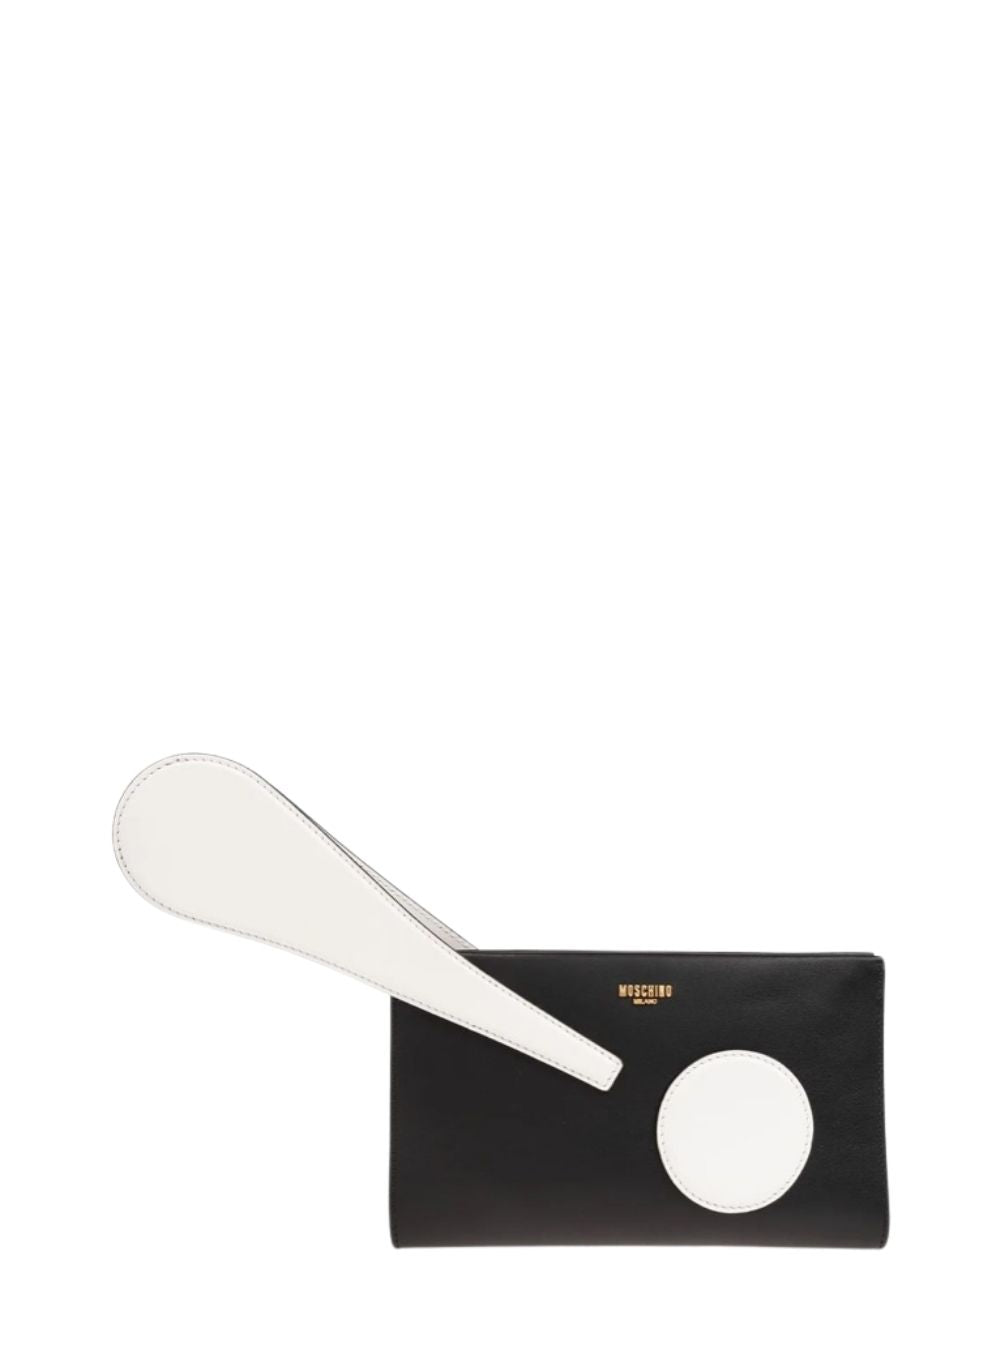 MOSCHINO | Exclamation Point Clutch